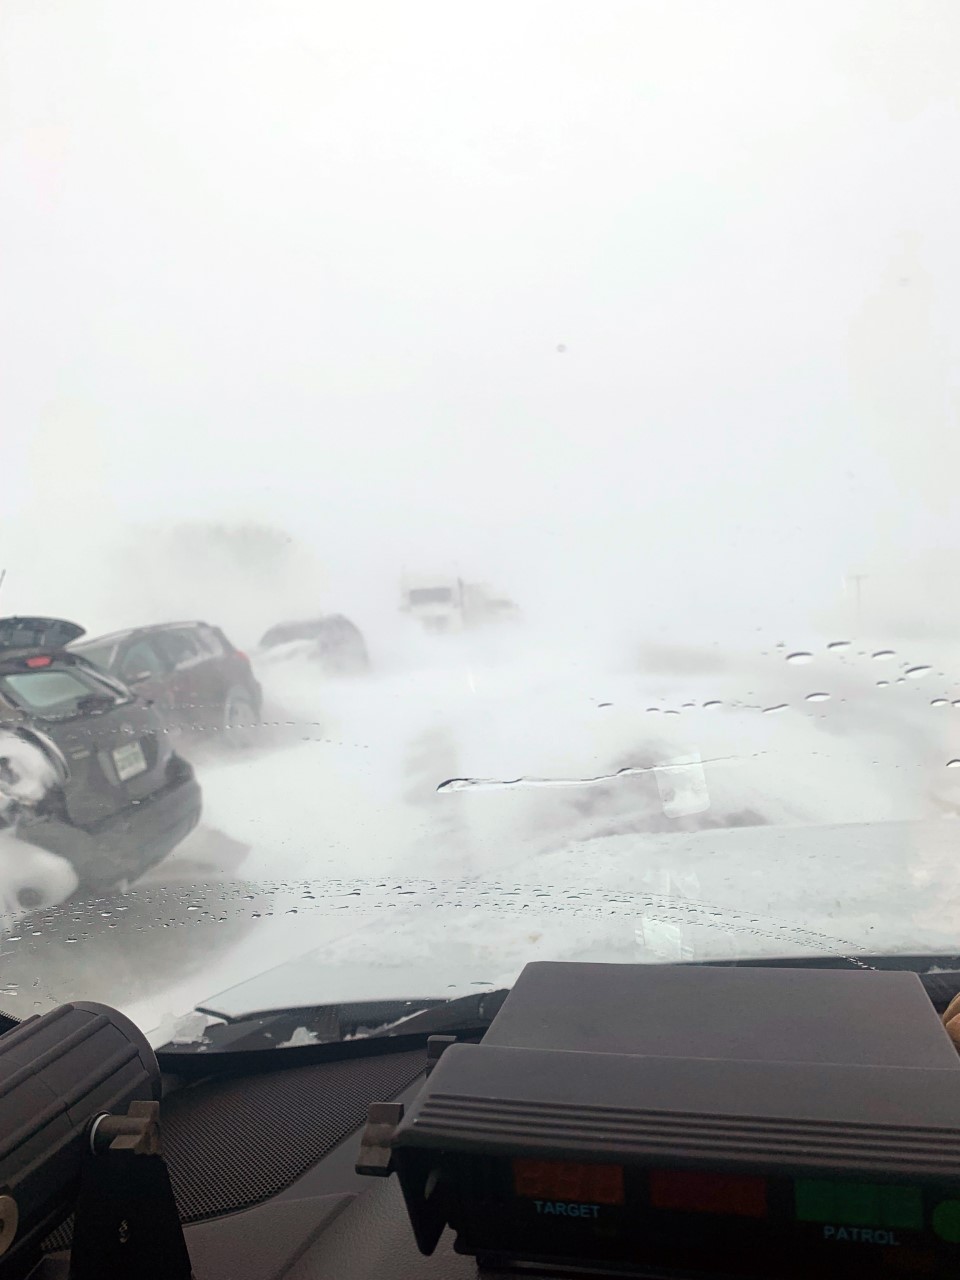 A collision on Tuesday during a snowstorm in southern Saskatchewan.